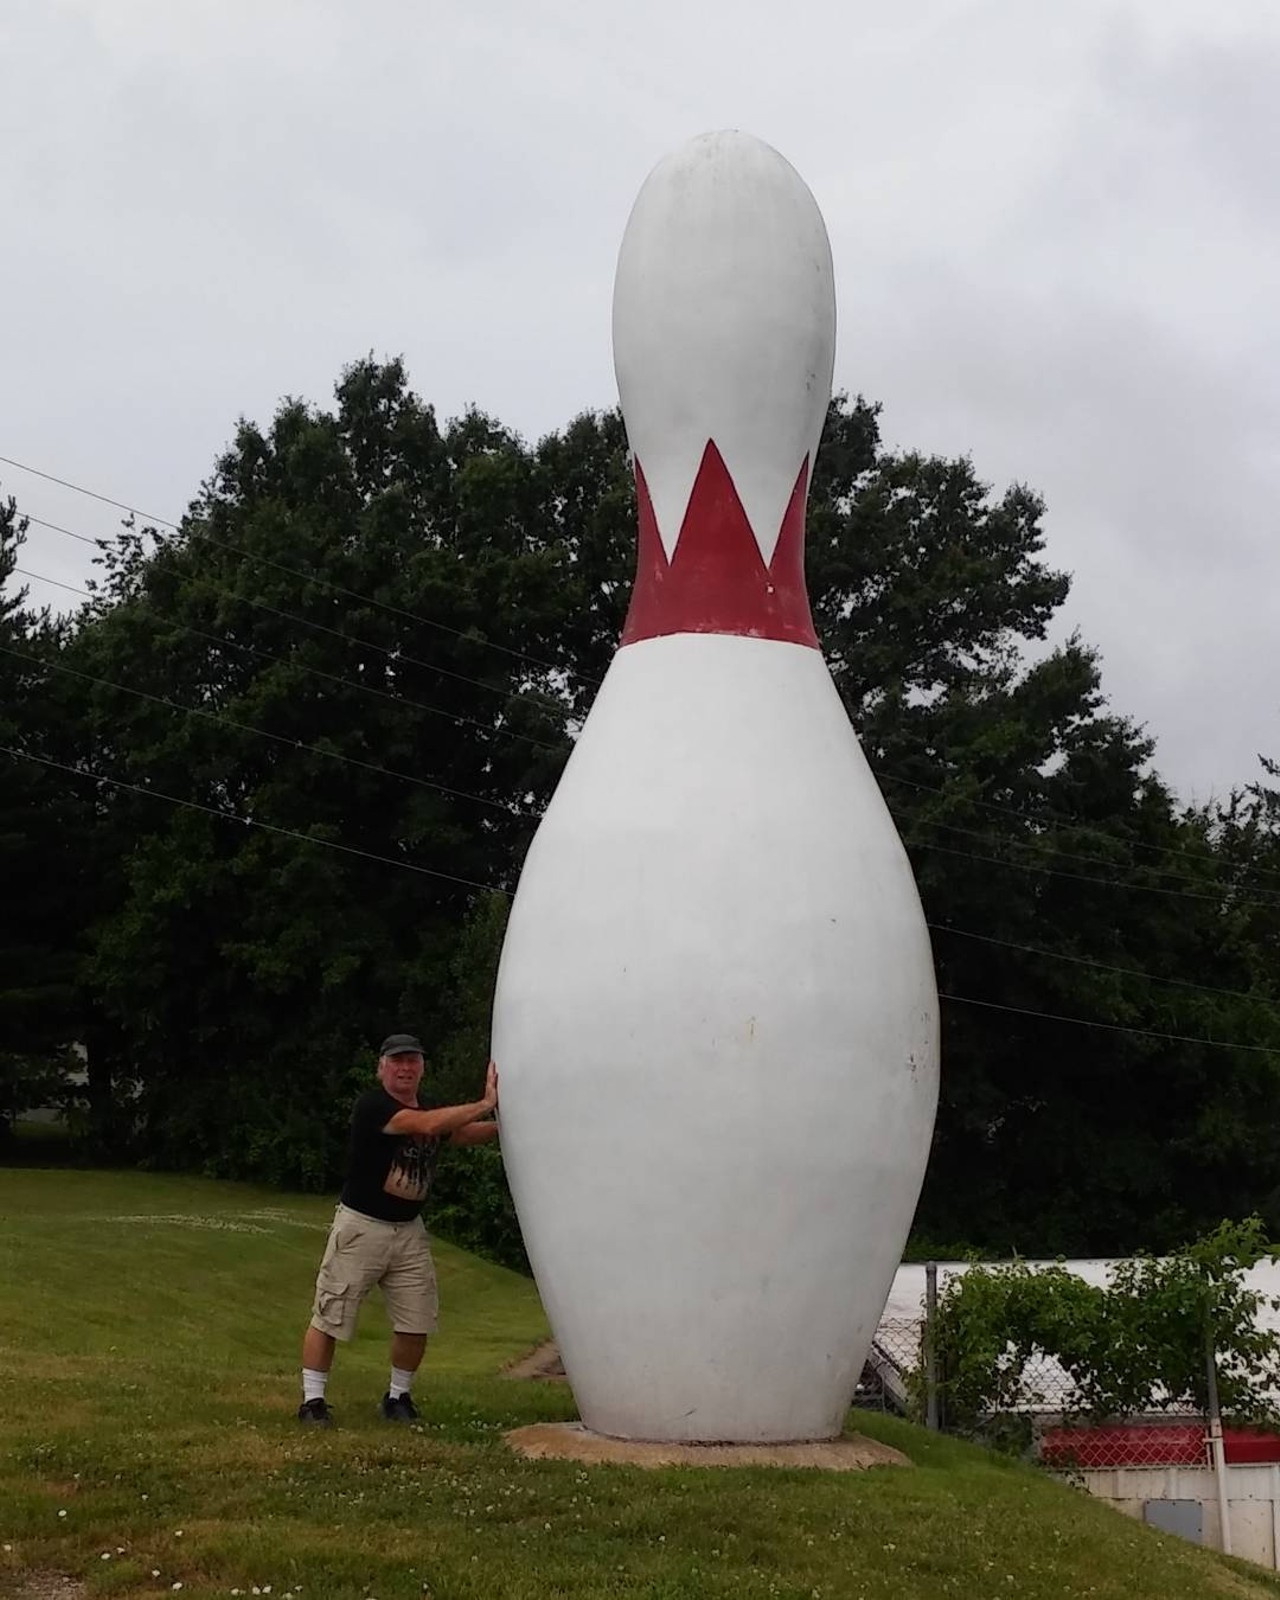 15-Foot-Tall Bowling Pin
6045 W. Outer Rd., Imperial, MO
Have a bowler in your family? This is the photo opportunity that they've been waiting for! Head down to Imperial Bowl and "strike" a pose.
Photo courtesy of redhindy / Instagram